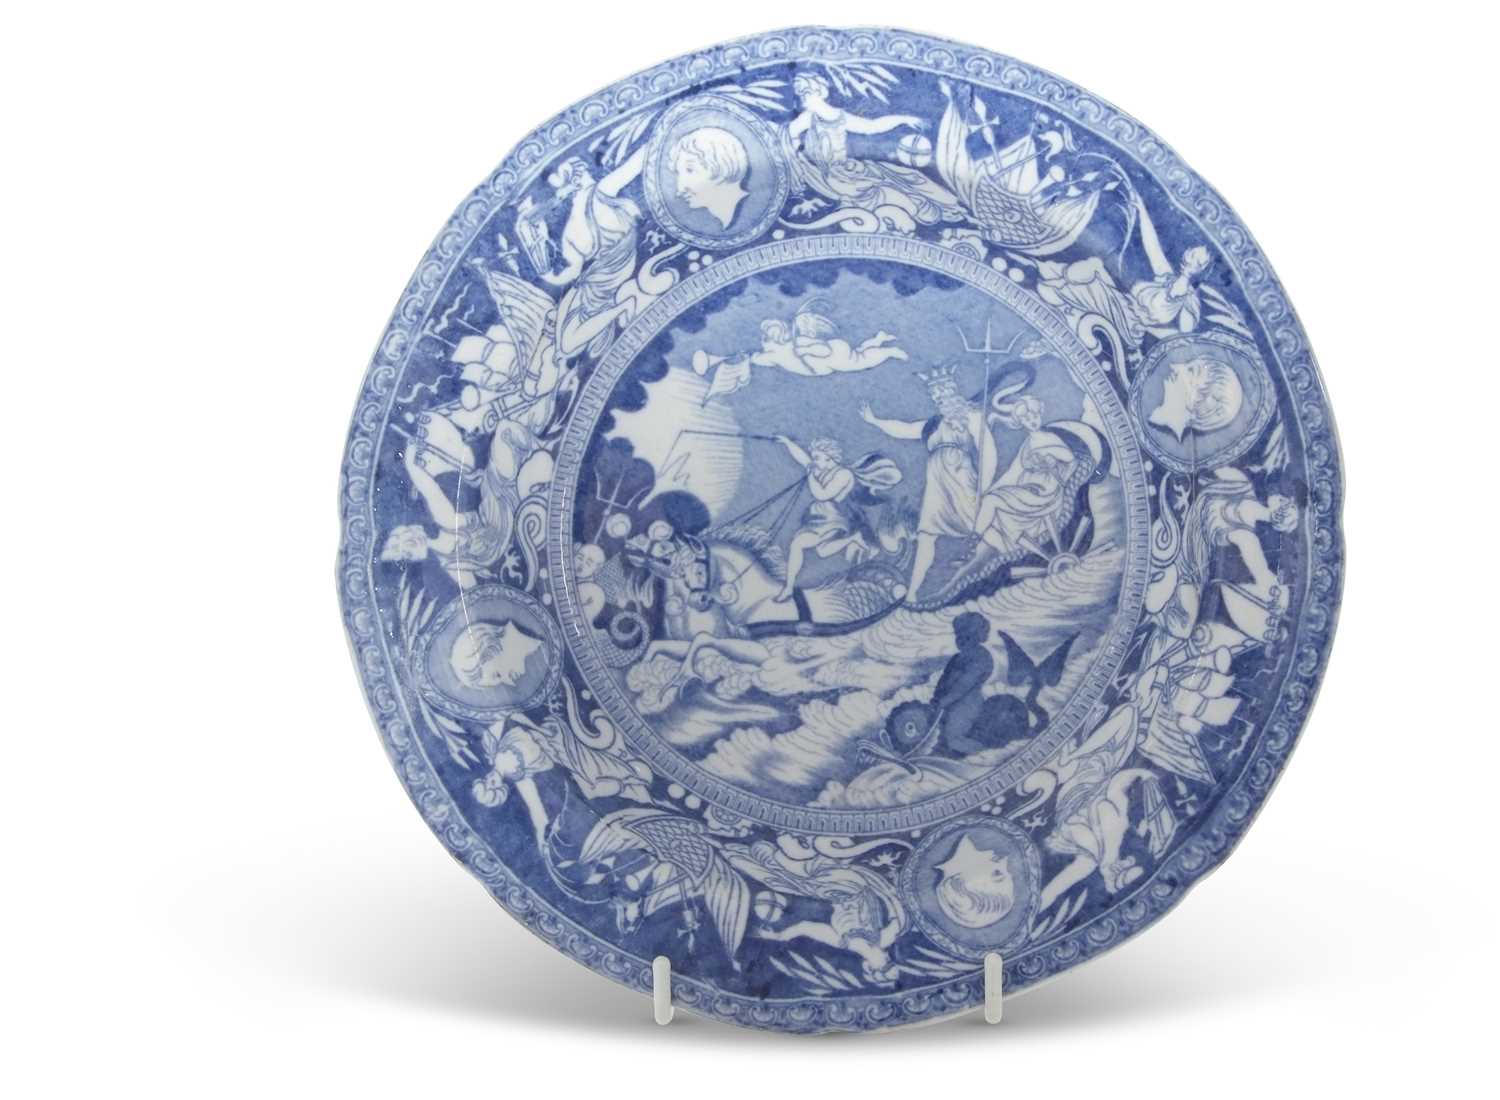 A rare pearlware plate c1810 printed in underglaze blue with an allegorical scene of Nelson being